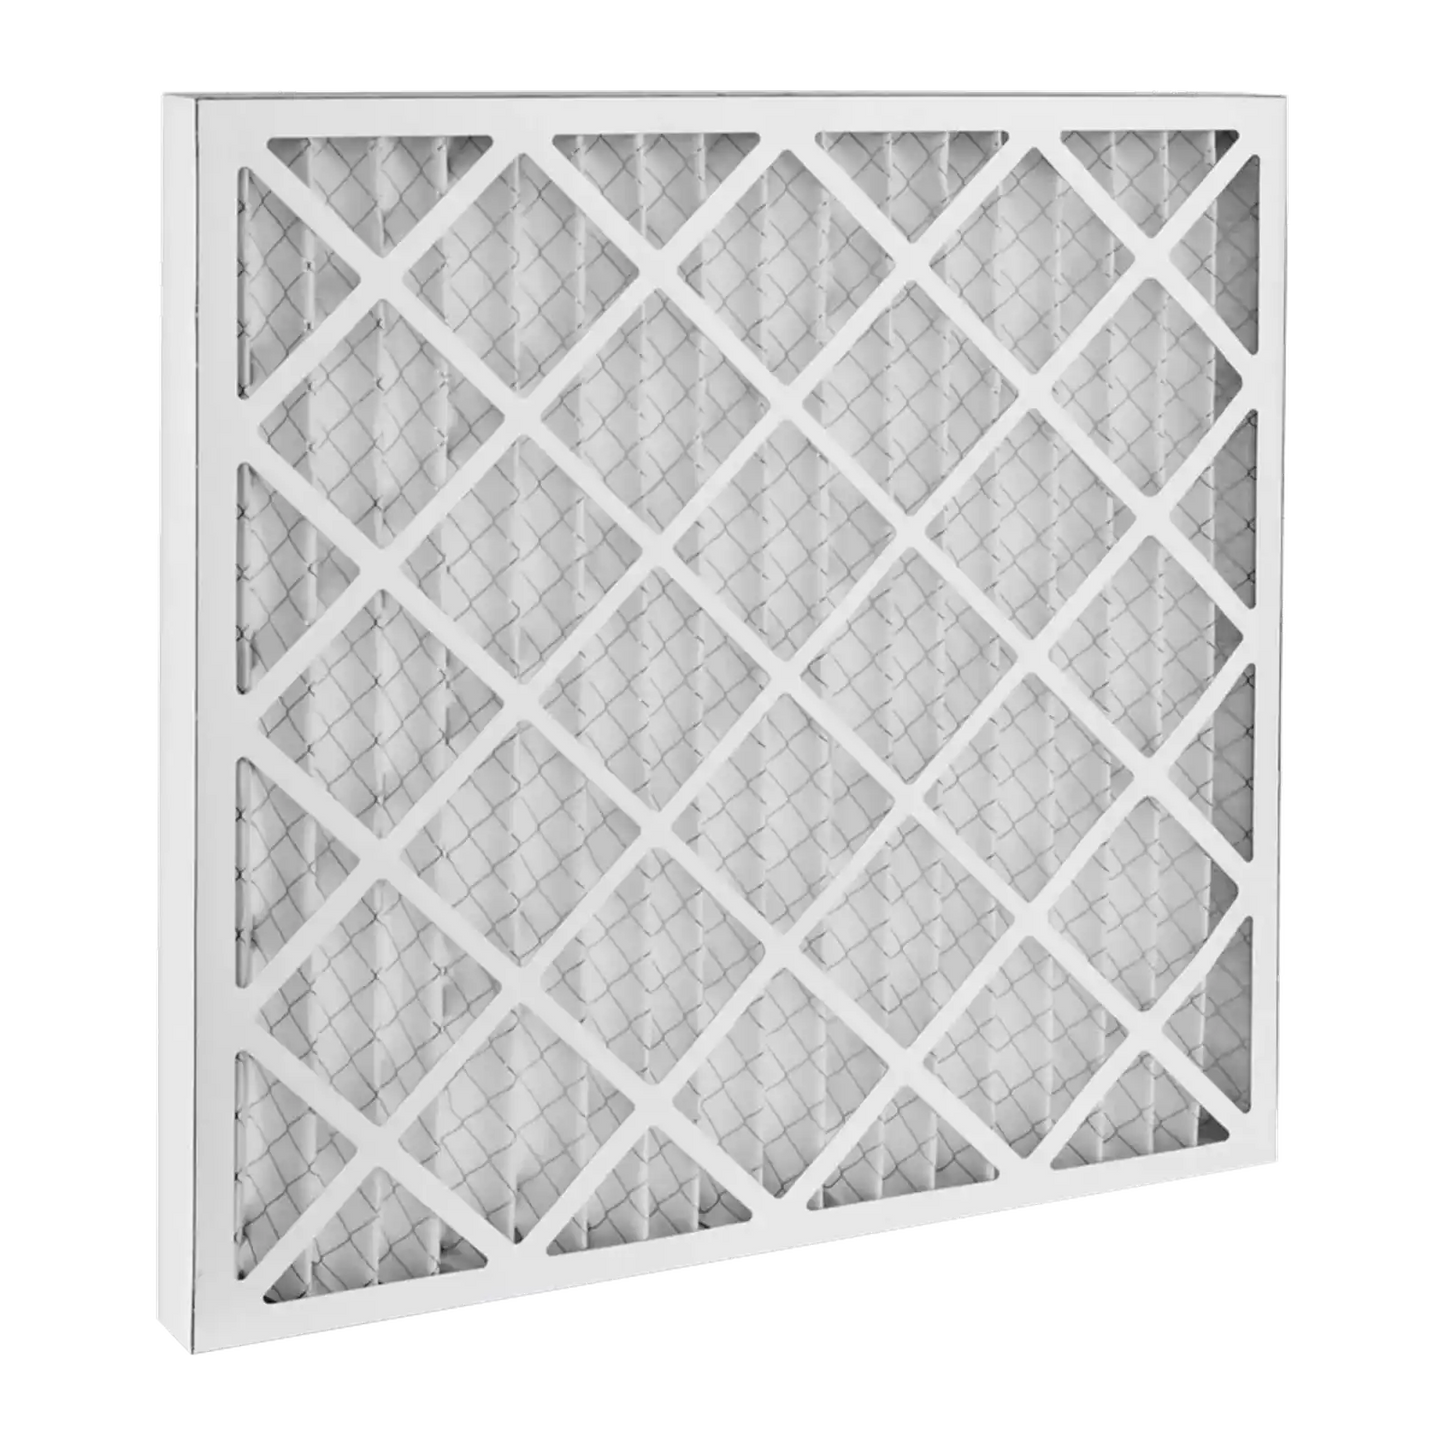 Dafco 14x20x1 Furnace AC Filter - Case of 12